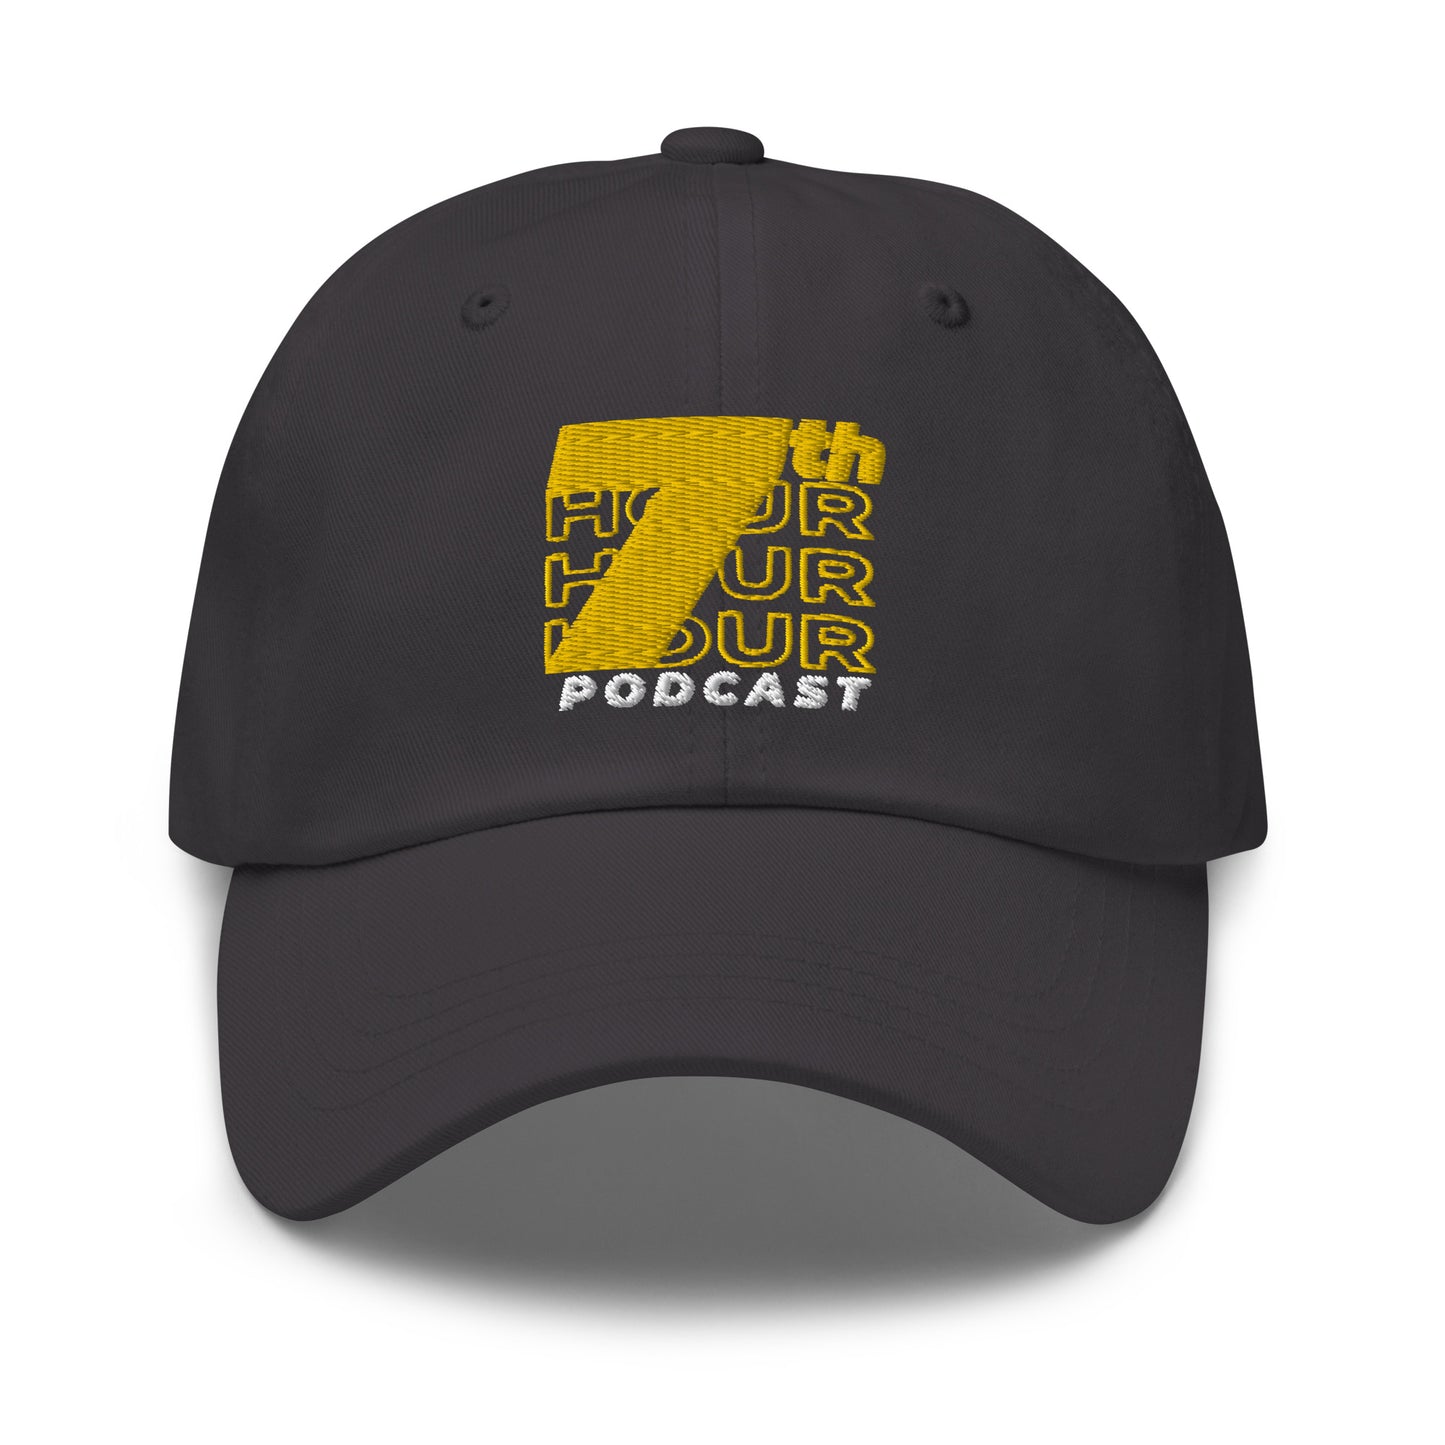 7th Hour Podcast - Embroidered Dad hat